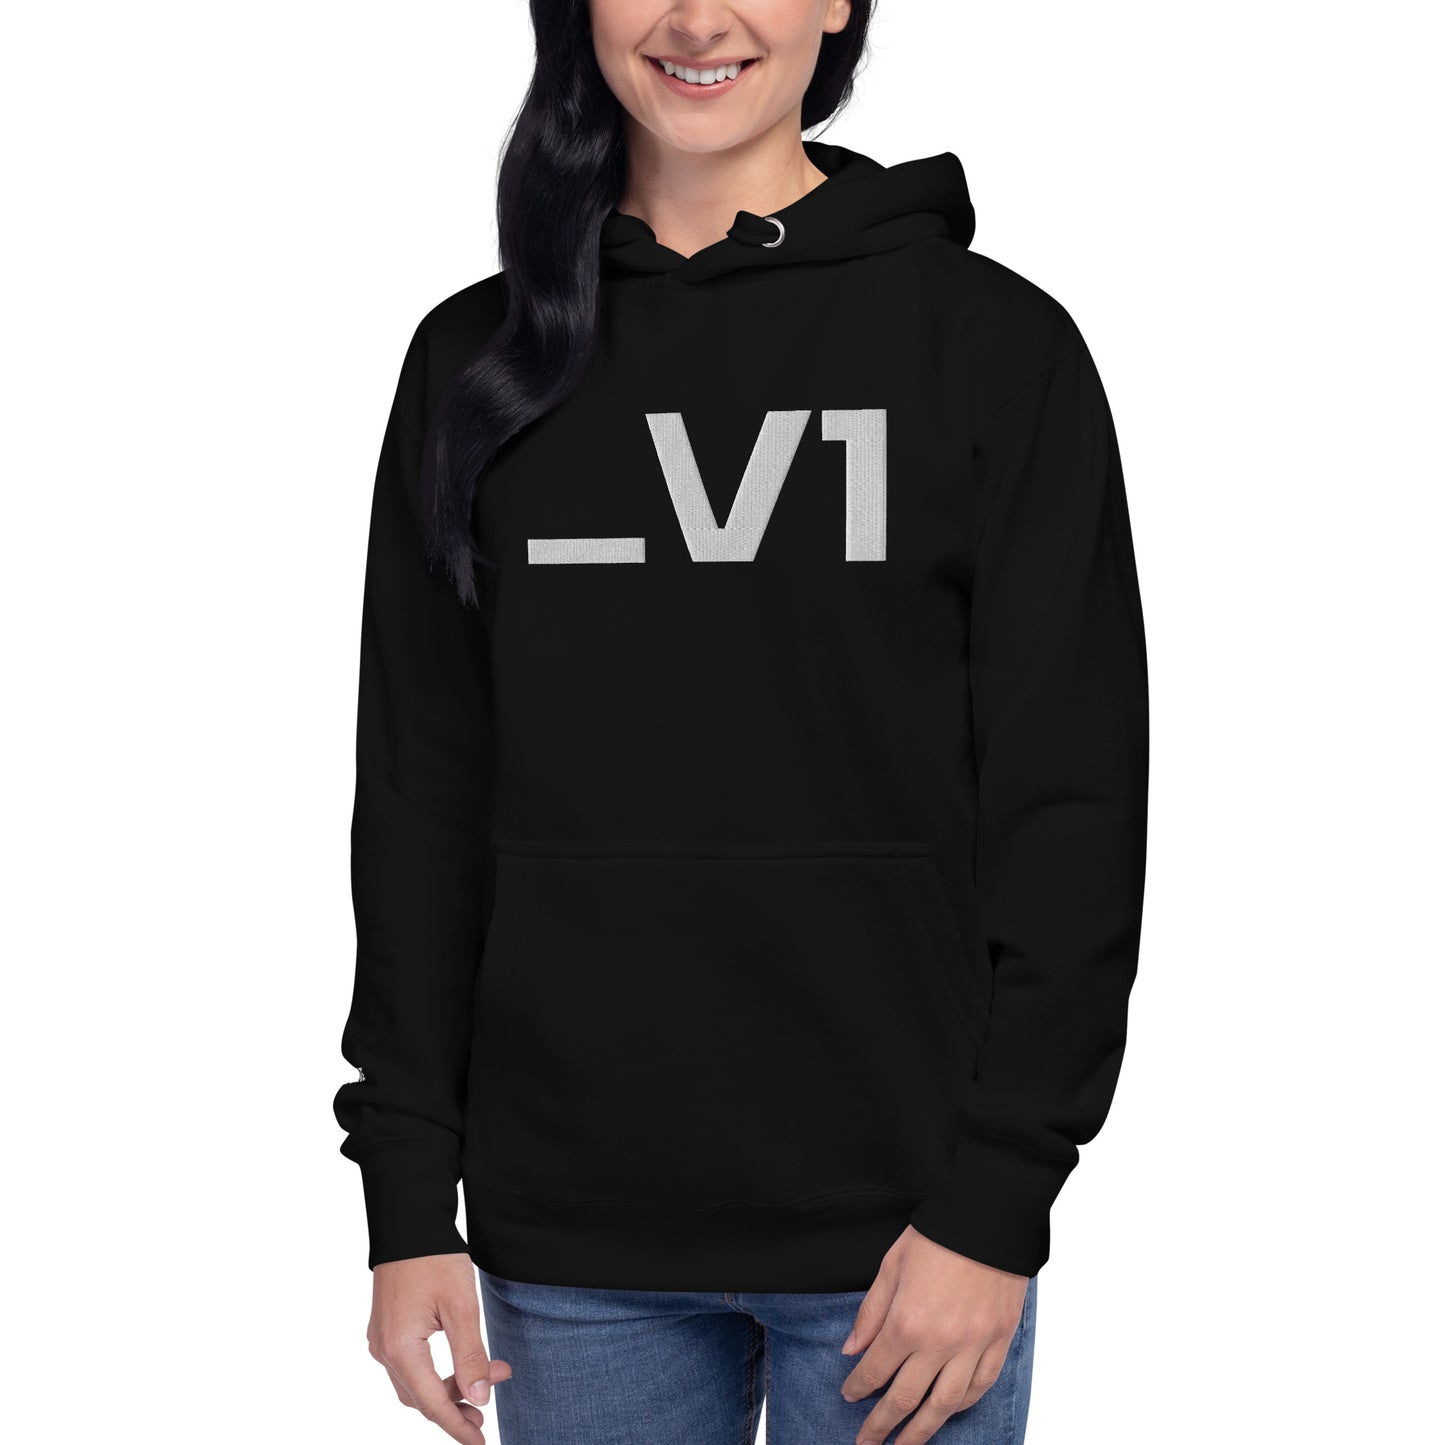 _V1 Large Embroidery Unisex Hoodie